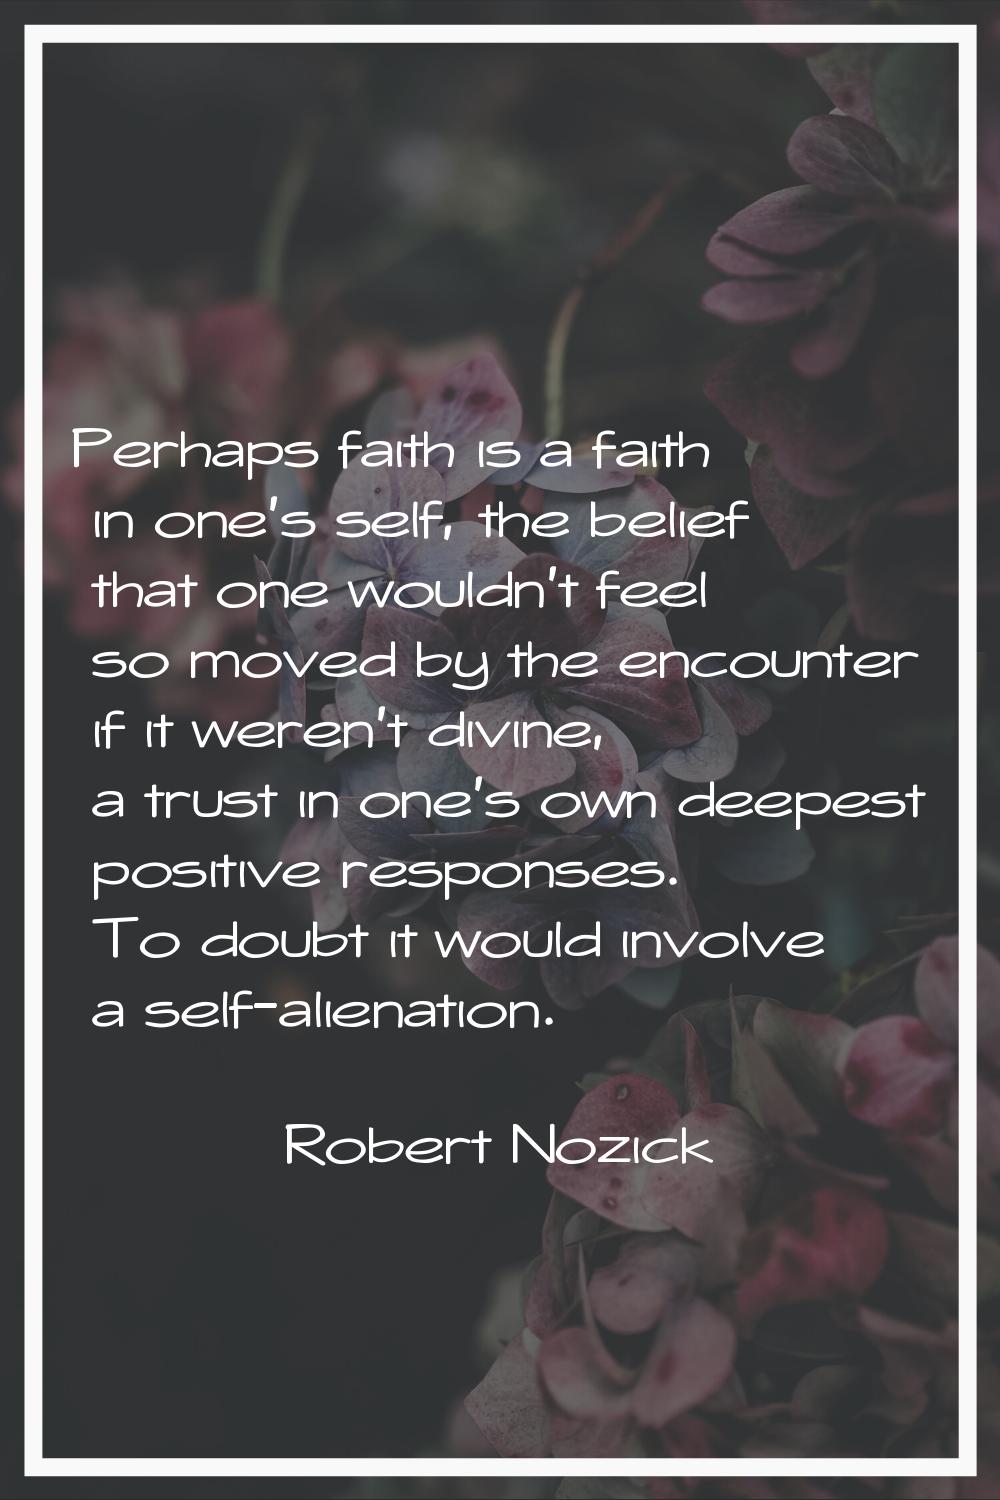 Perhaps faith is a faith in one's self, the belief that one wouldn't feel so moved by the encounter